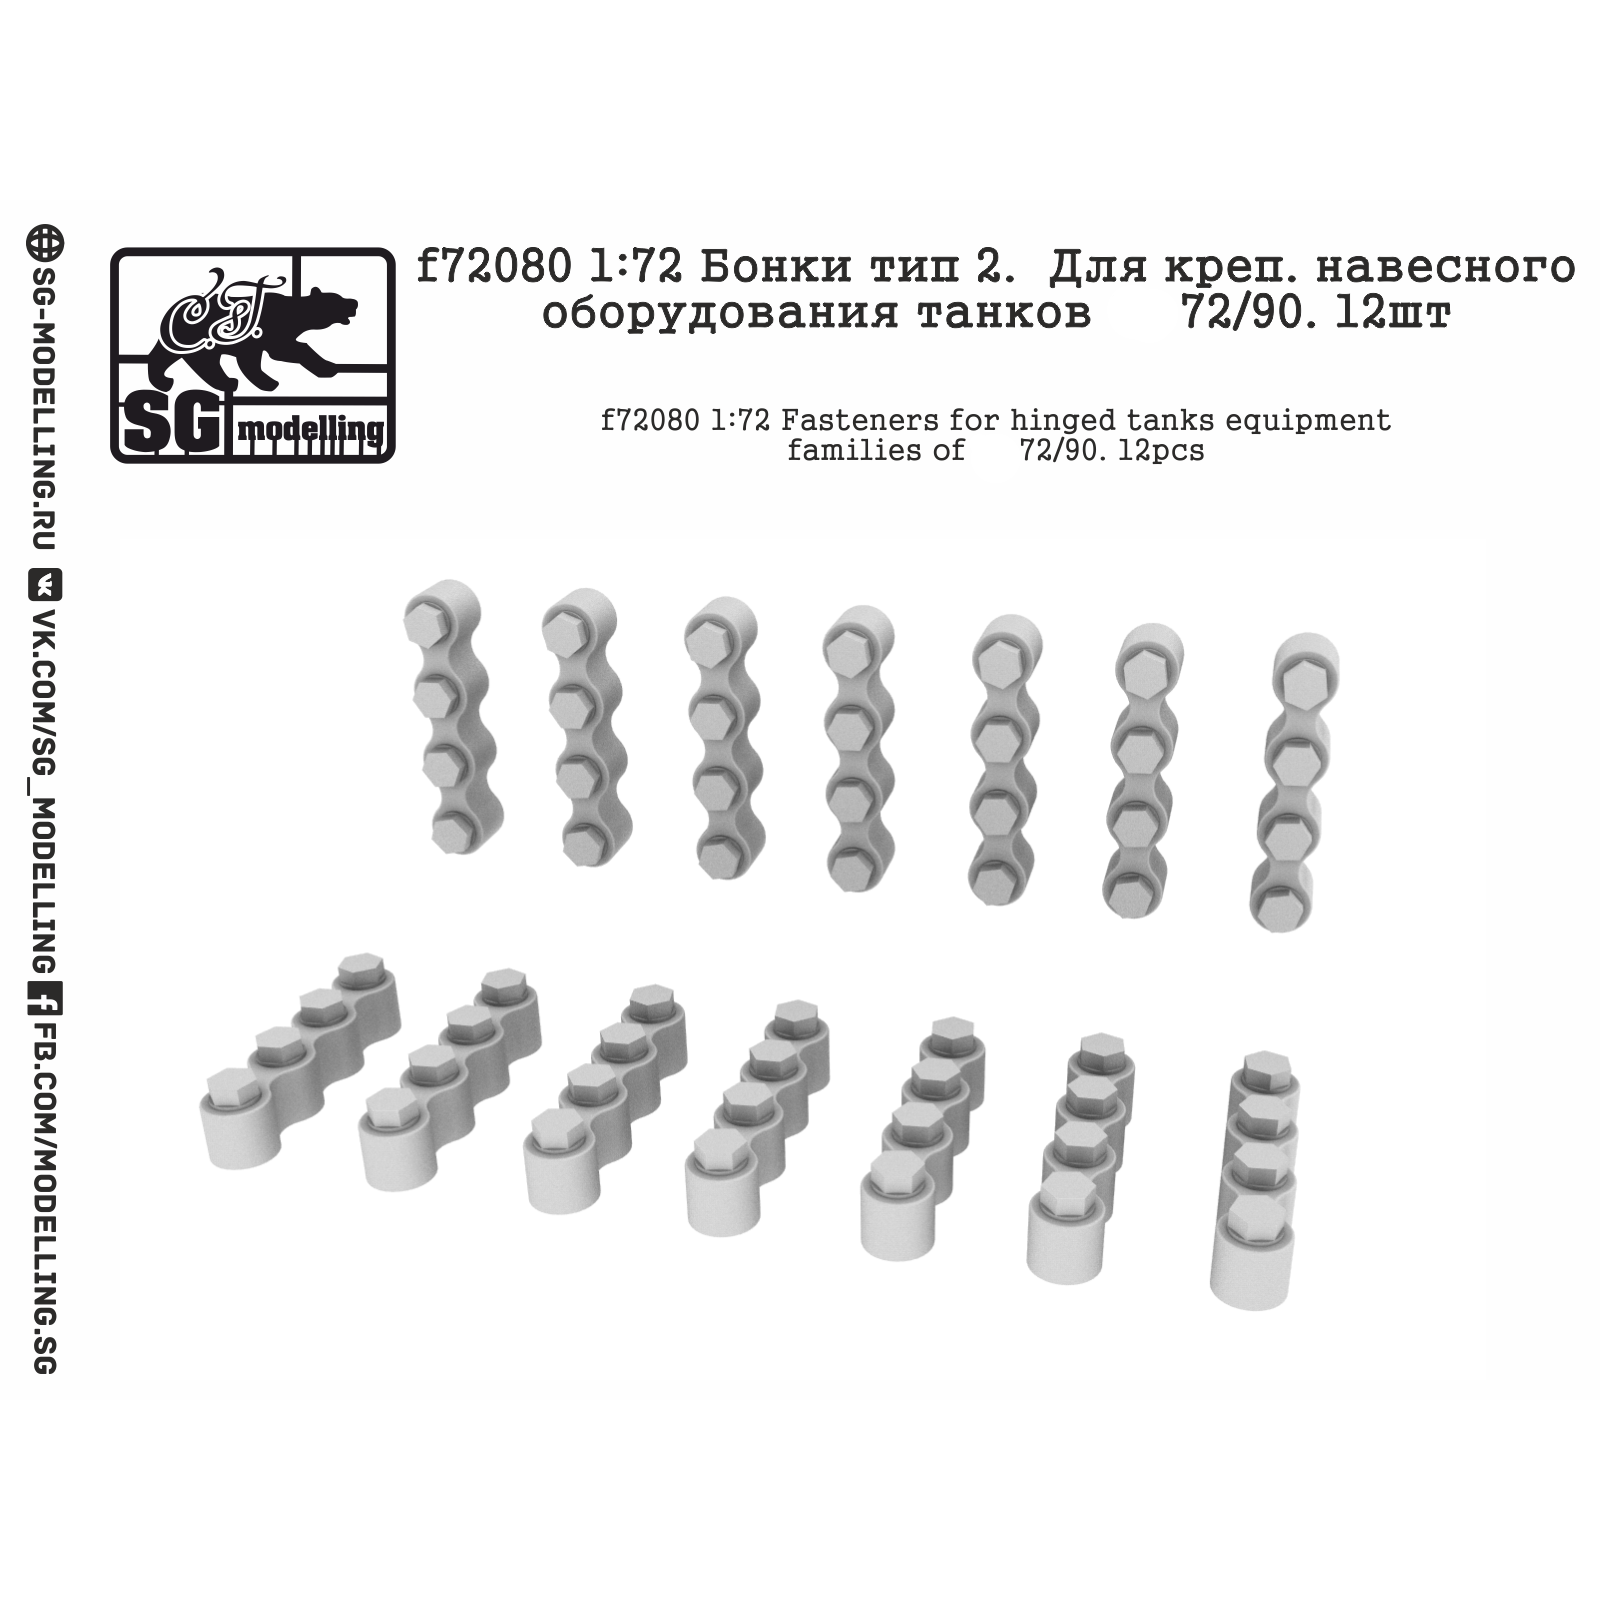 F72080 New Penguin 1/72 bonka type 2.  For crepe. attachments of tanks of T-72/90 families. 14pcs